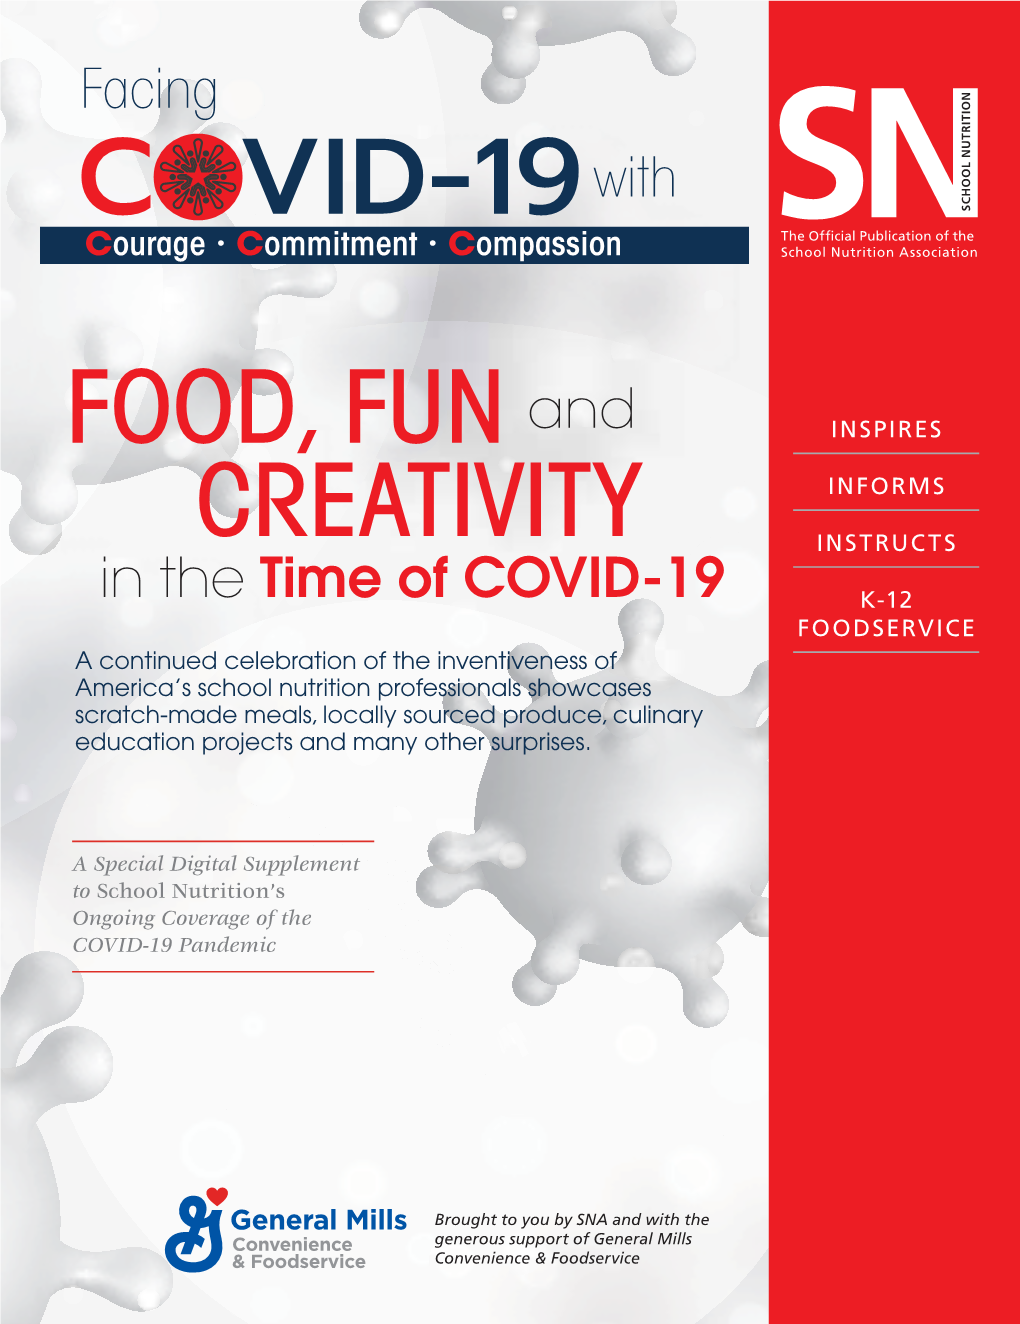 Food, Fun, and Creativity in the Time of COVID-19, School Nutrition, Special Supplement 2020